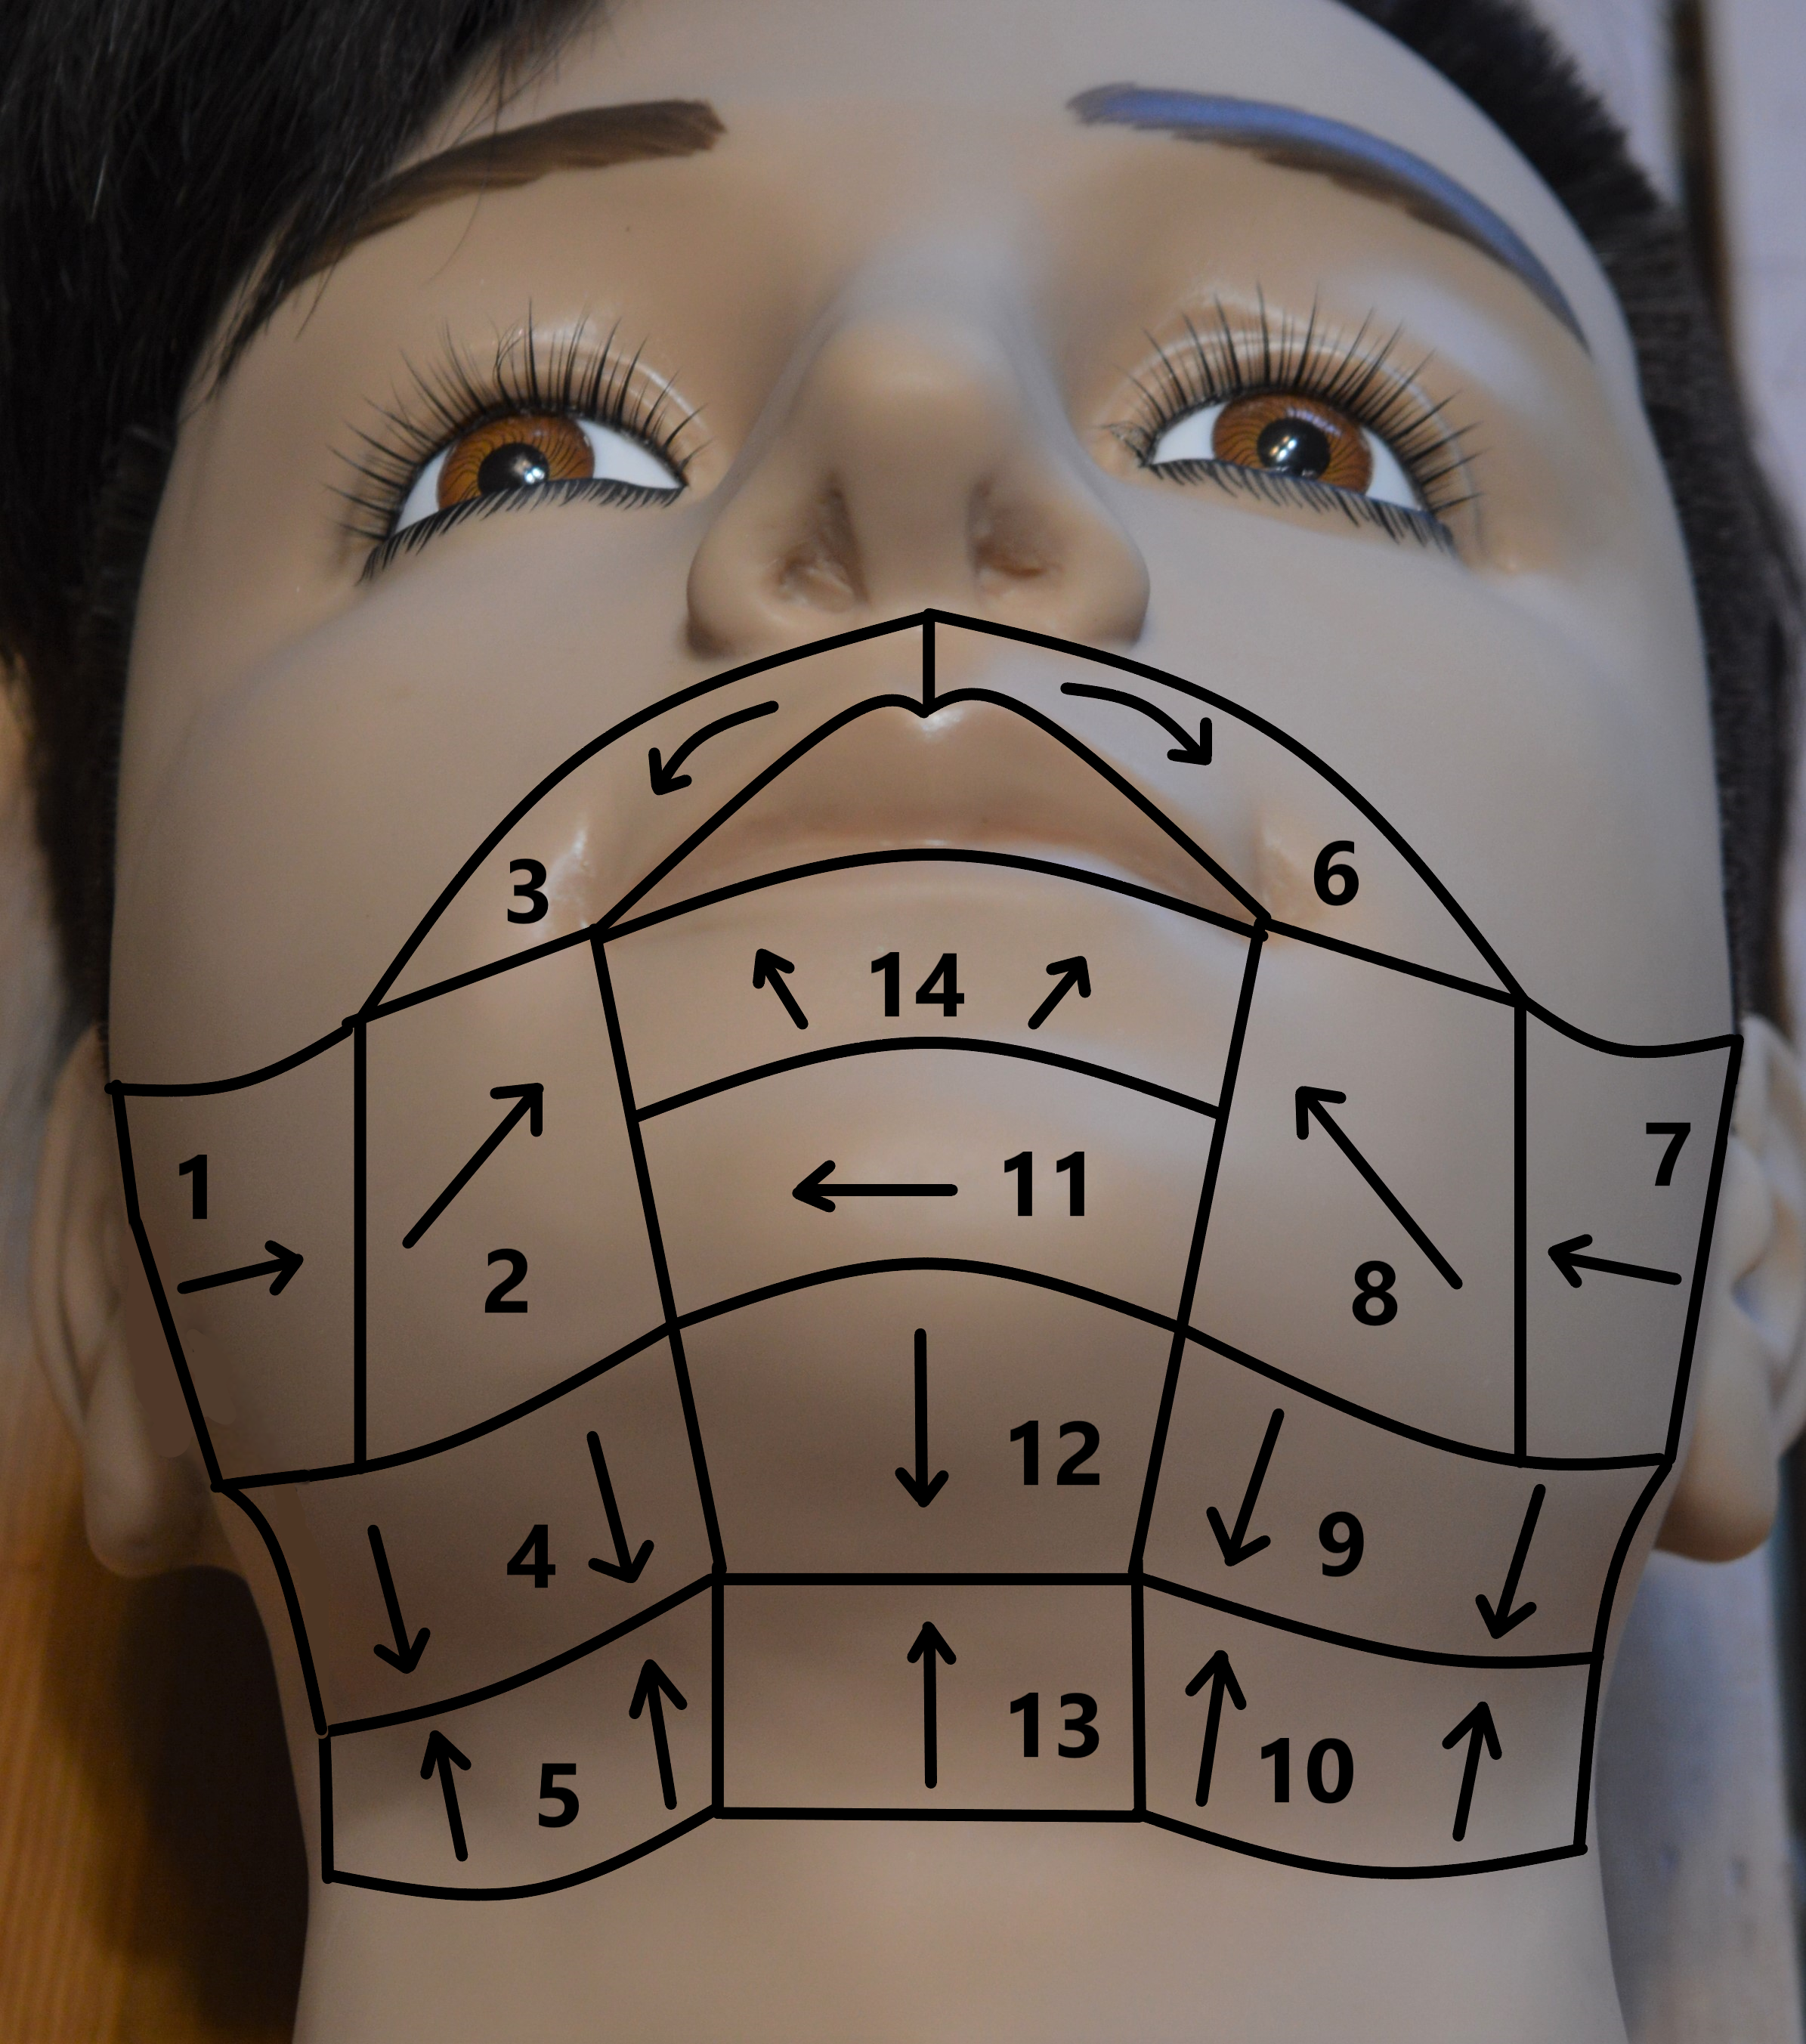 A mannequin with the 14 shaving areas labelled. See the previous chapter for full description.